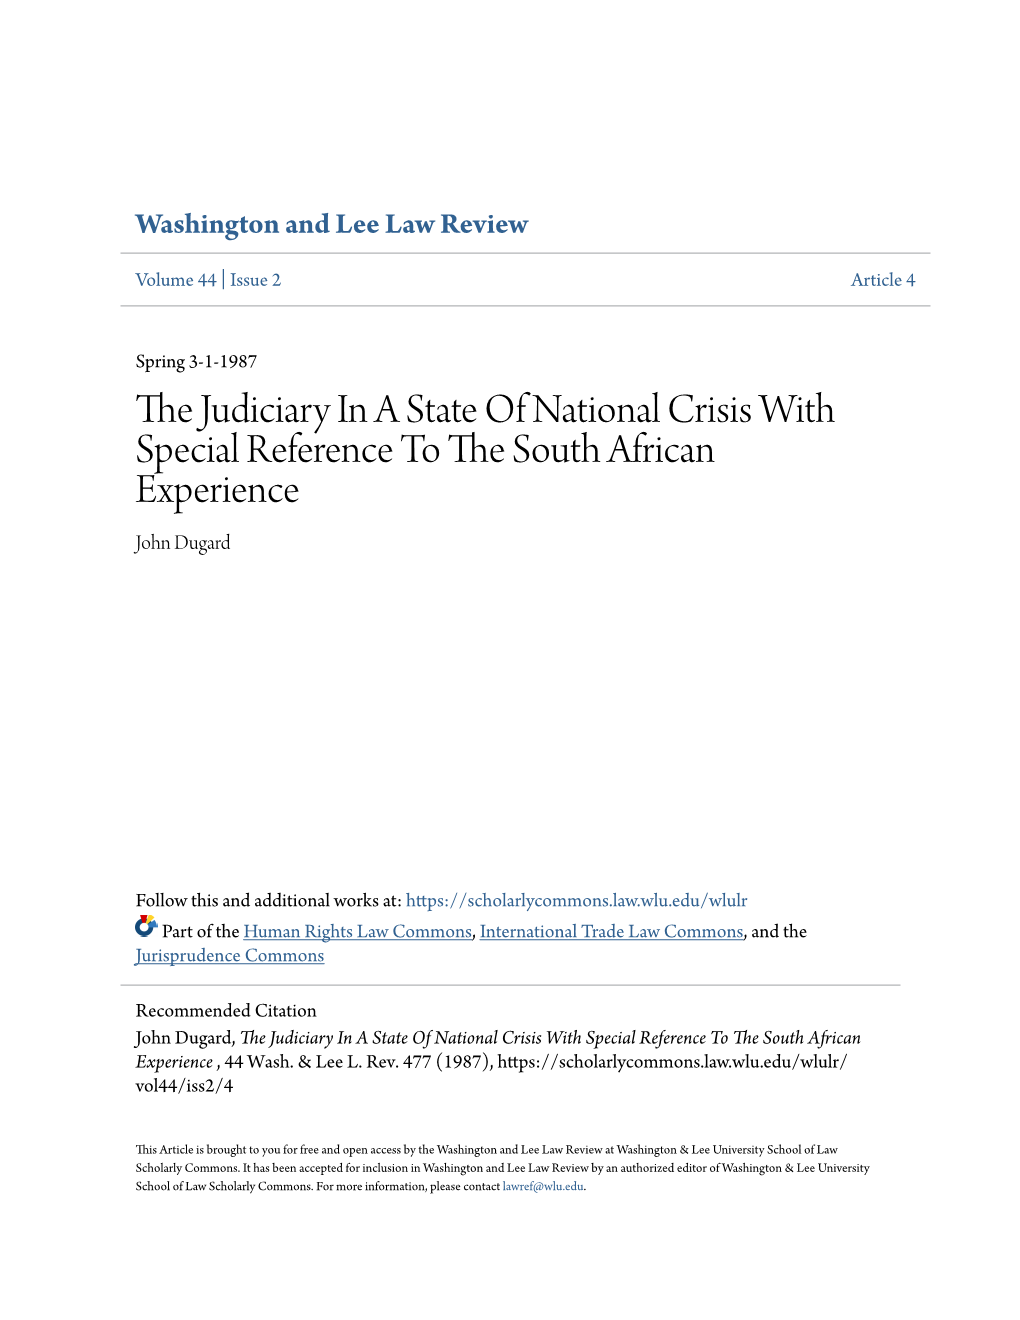 The Judiciary in a State of National Crisis with Special Reference to the South African Experience , 44 Wash